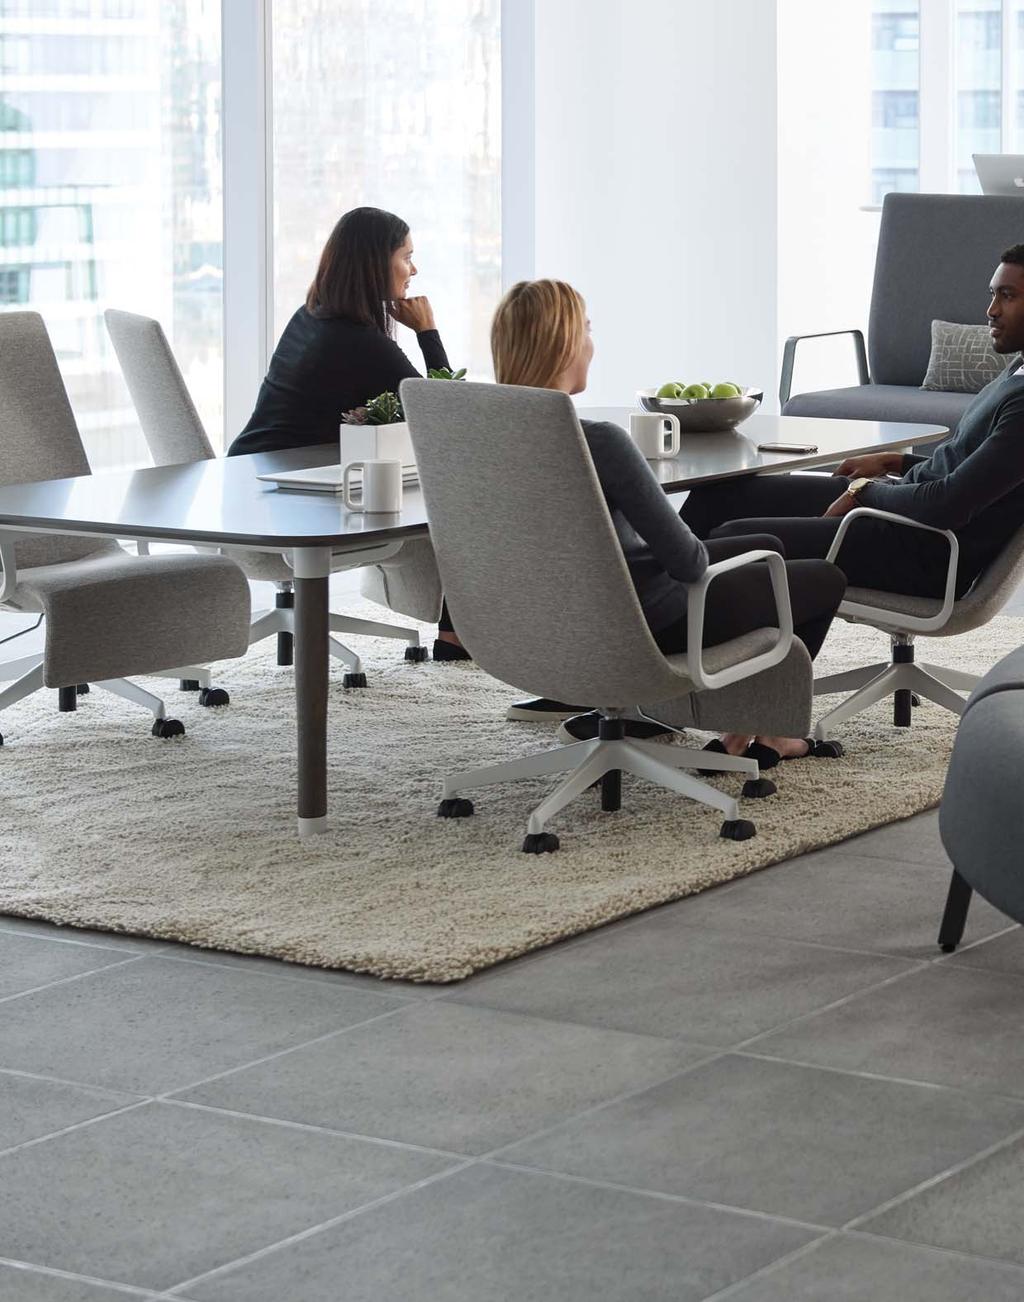 Conference Lounge Chairs: Digi Tweed, Silt Tweed Pillows: Thangka, Silver Rings frame Greystone encourages users to lounge and work, meet and